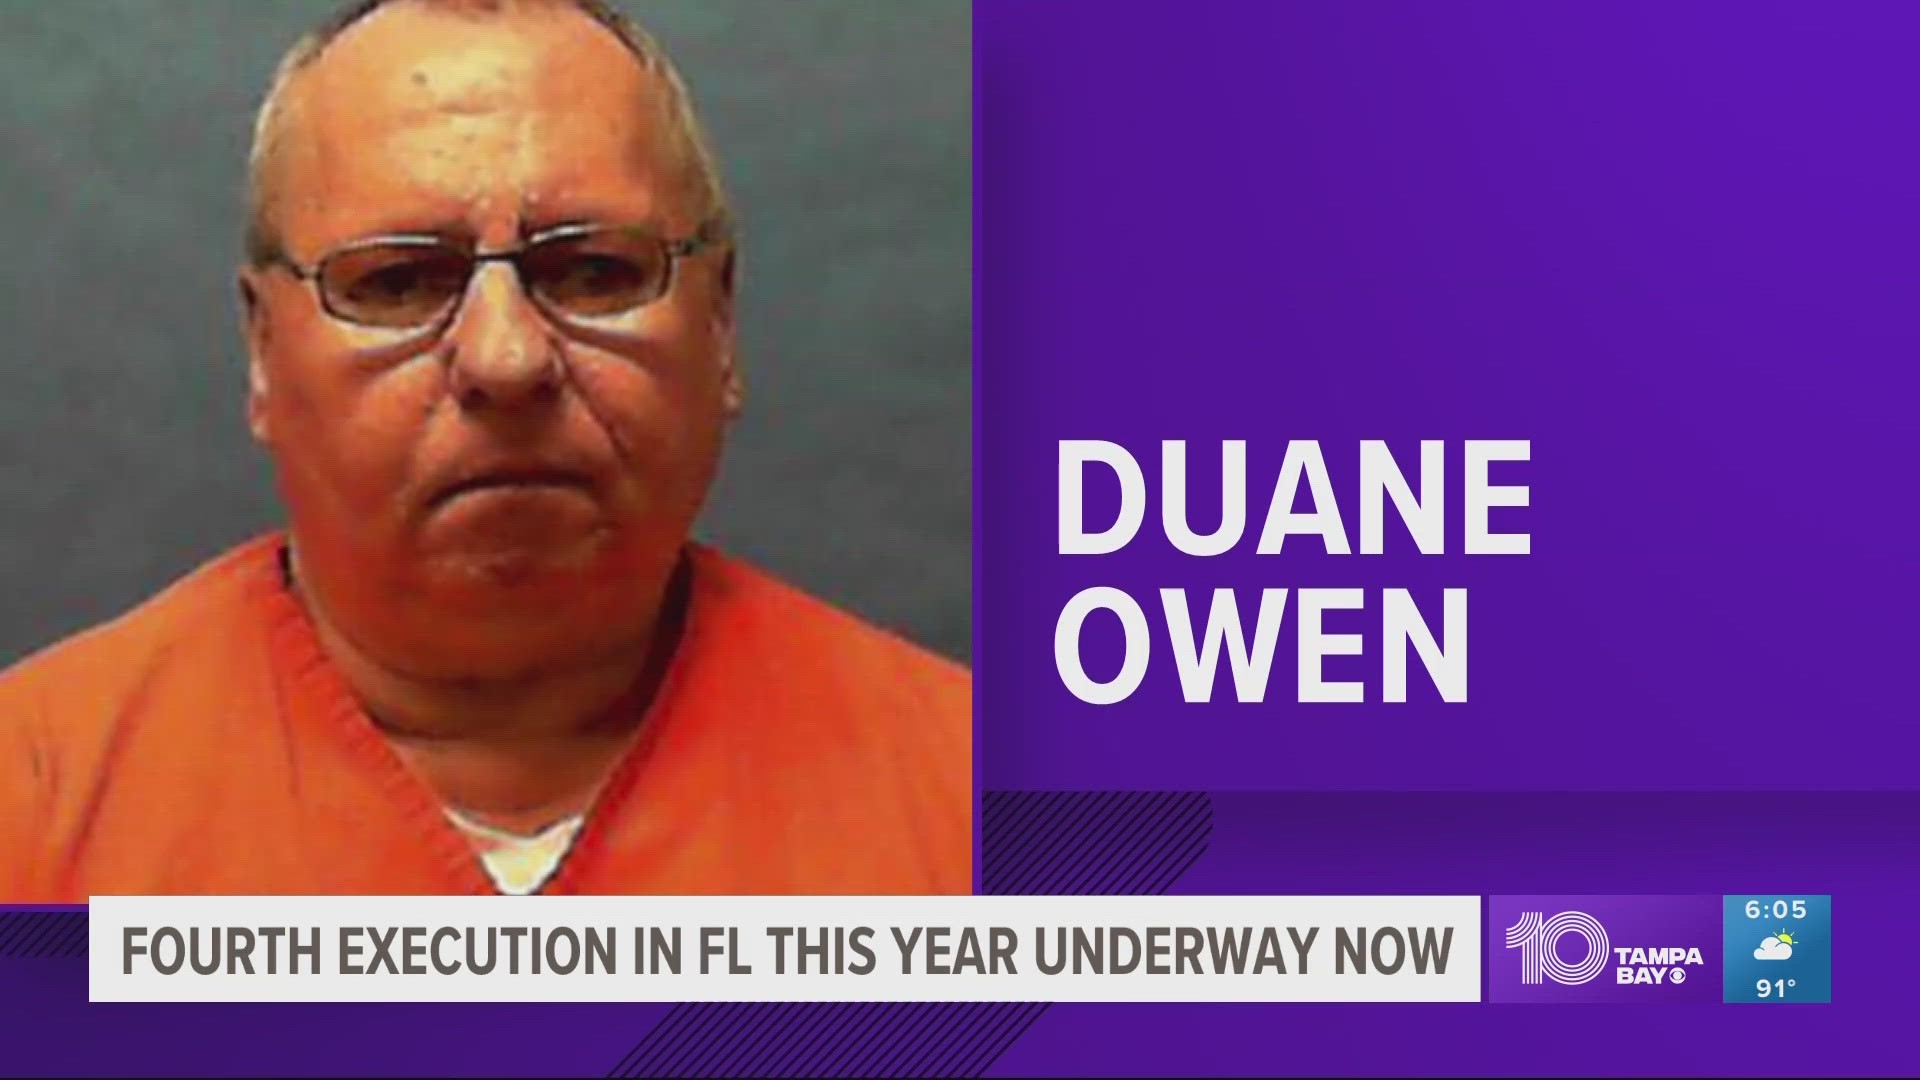 Duane Owen was scheduled to receive a lethal injection at 6 p.m. at Florida State Prison in Starke.